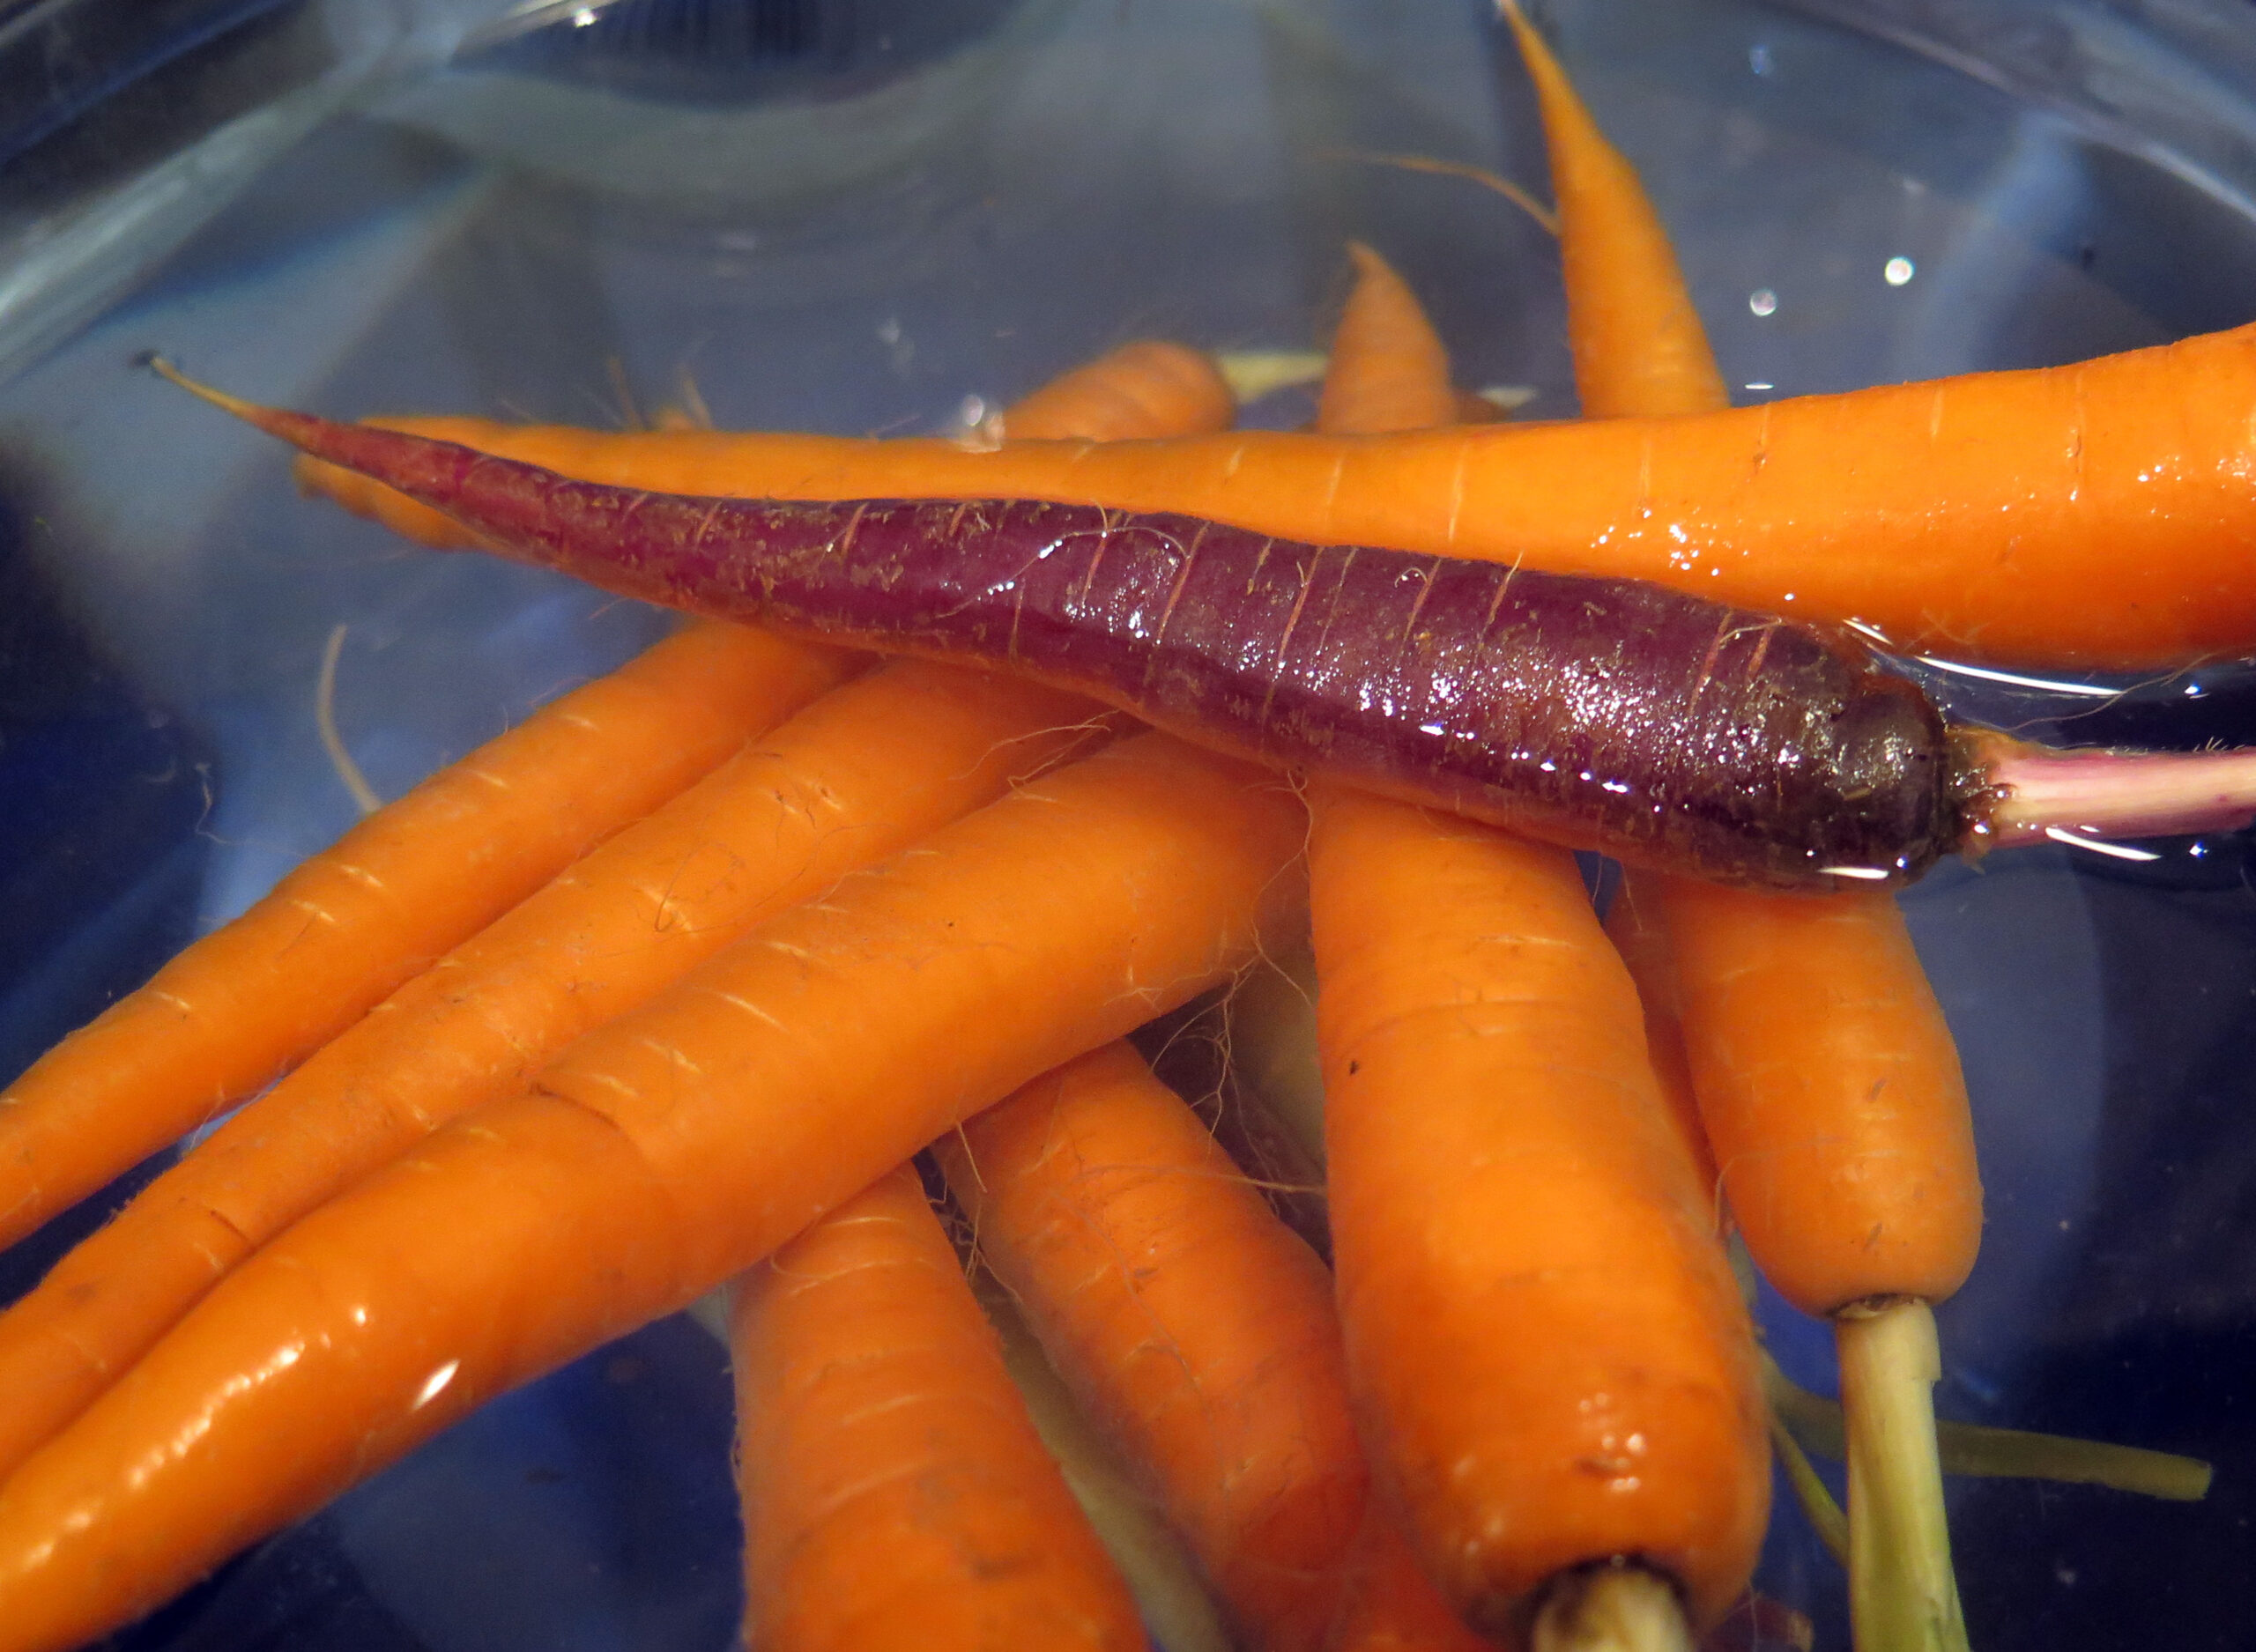 WTF are purple carrots and where did they come from?